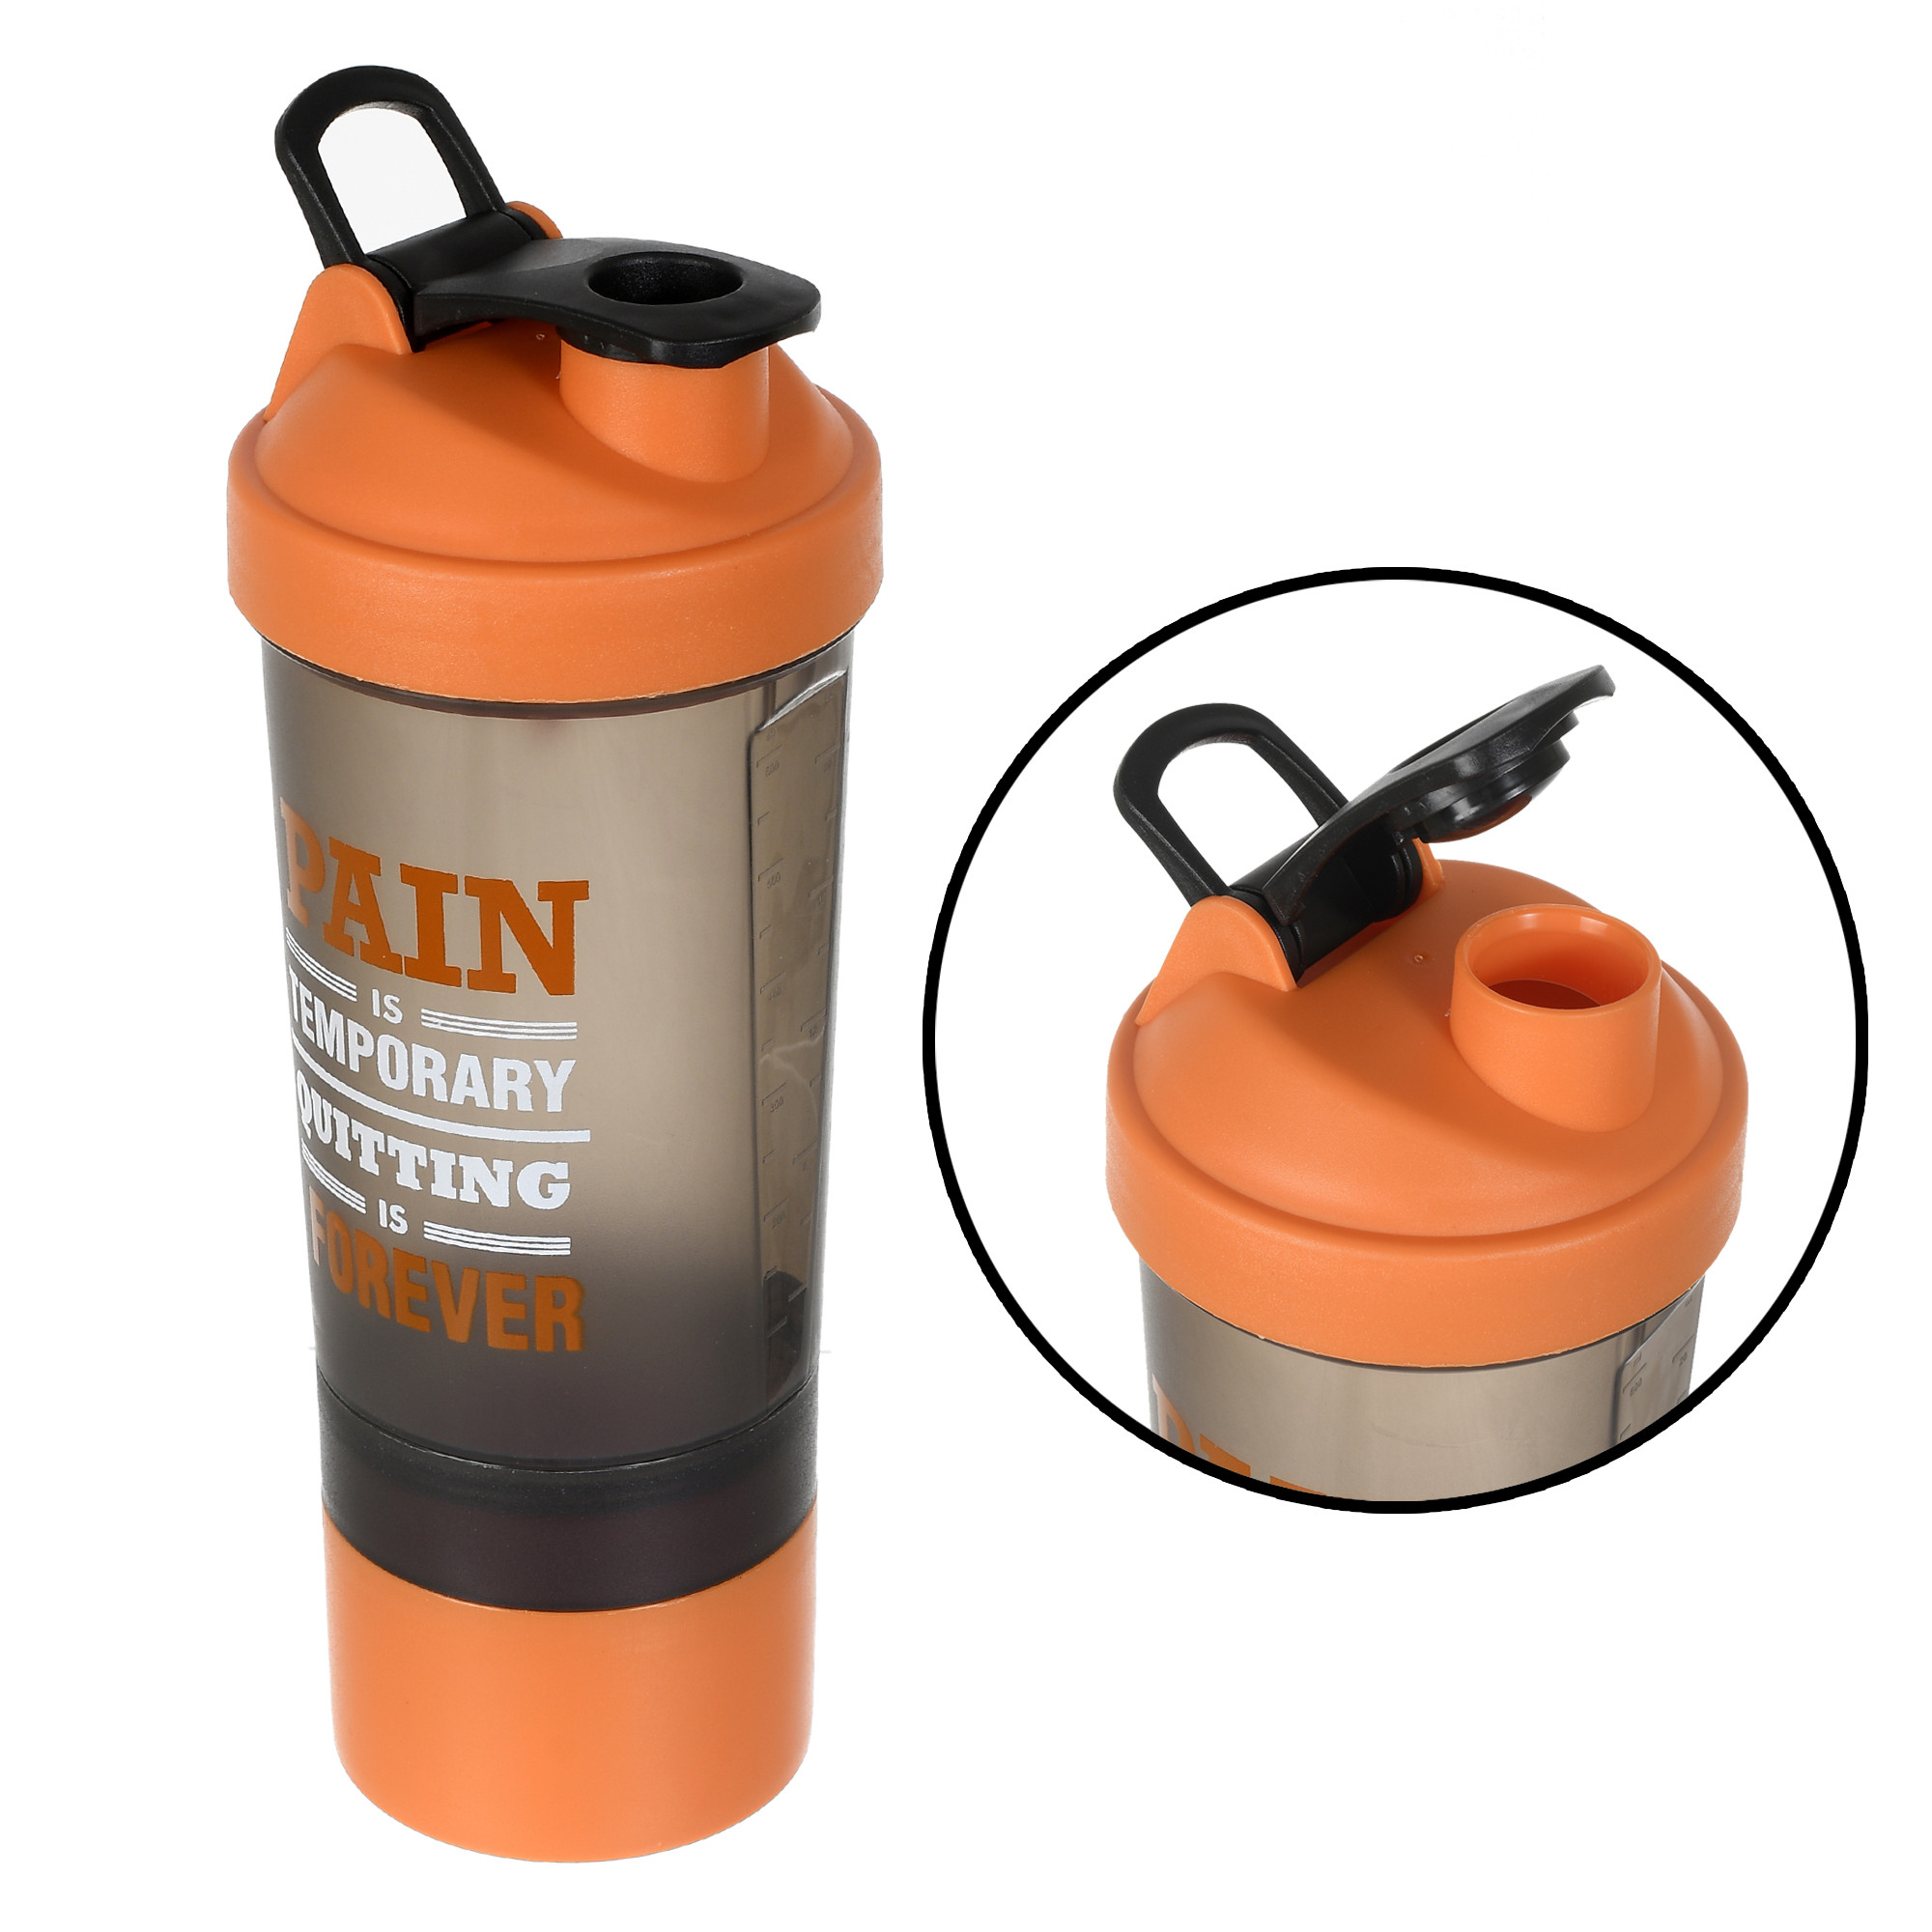 Kuber Industries Classic Shaker Bottle Perfect for Protein Shakes and Pre Workout with Pill Organizer and Storage for Protein Powder (Orange)